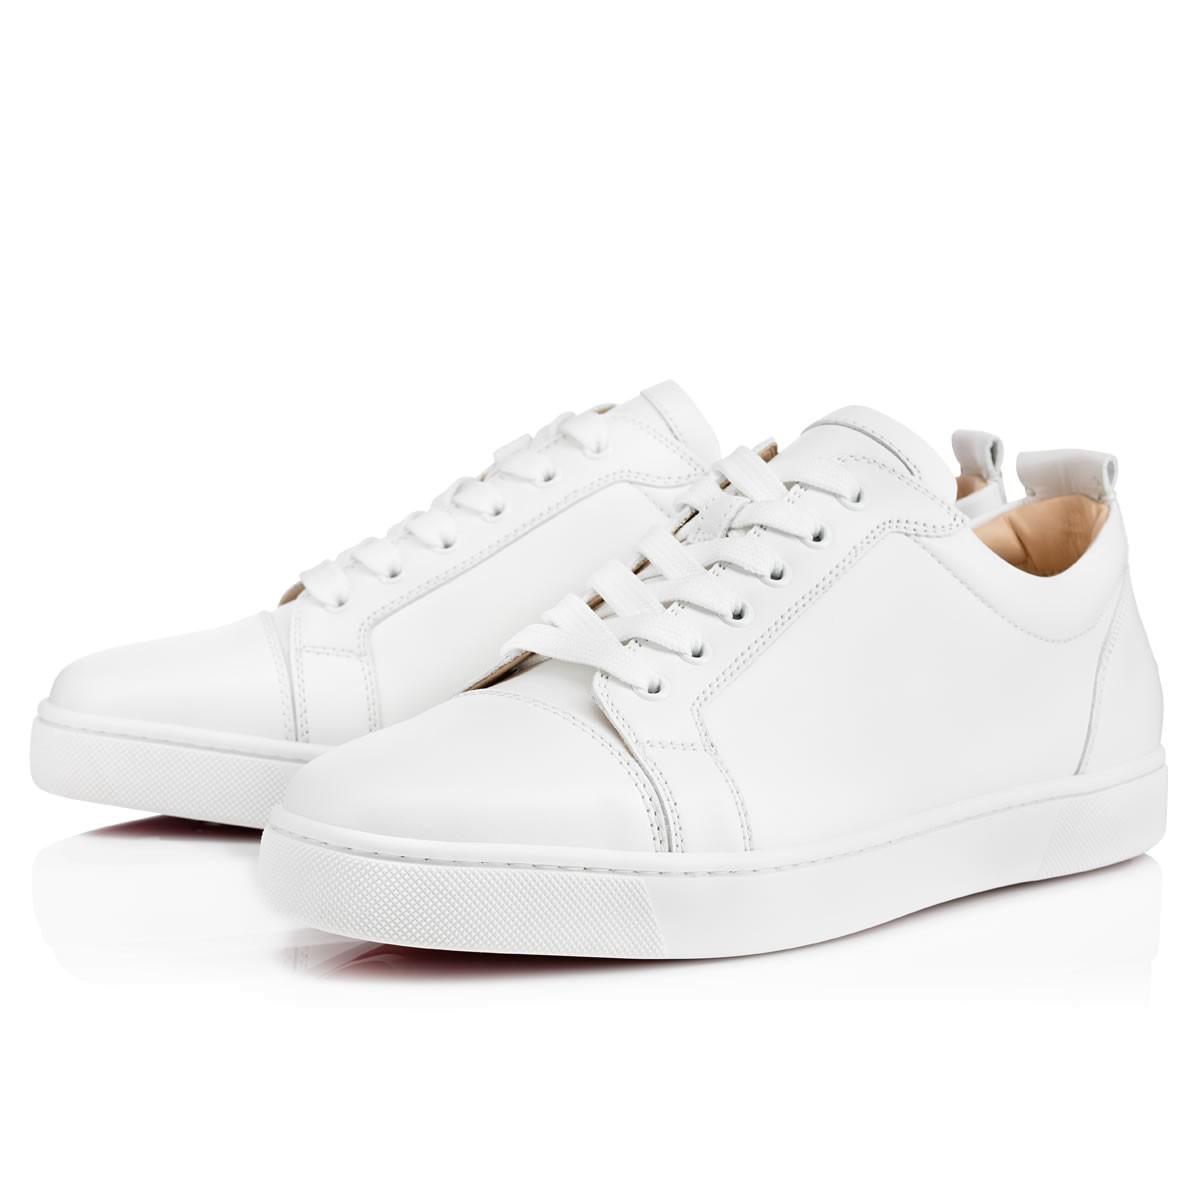 Lyst - Christian Louboutin Louis Junior Leather Low-Top Sneakers in ...